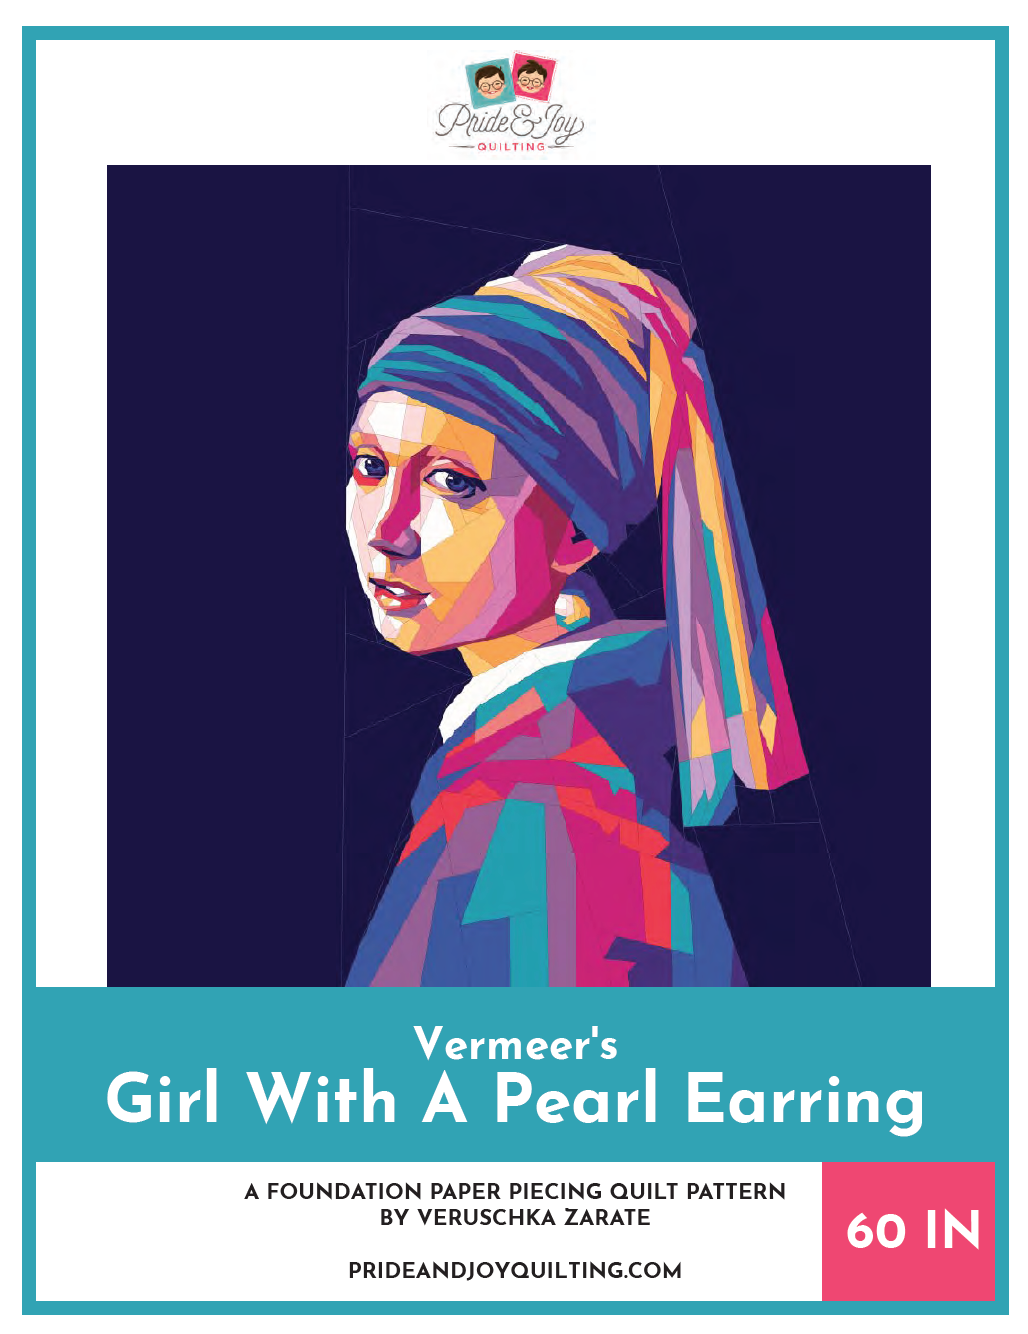 Girl with the Pearl Earring reproduction | Van Gogh Studio